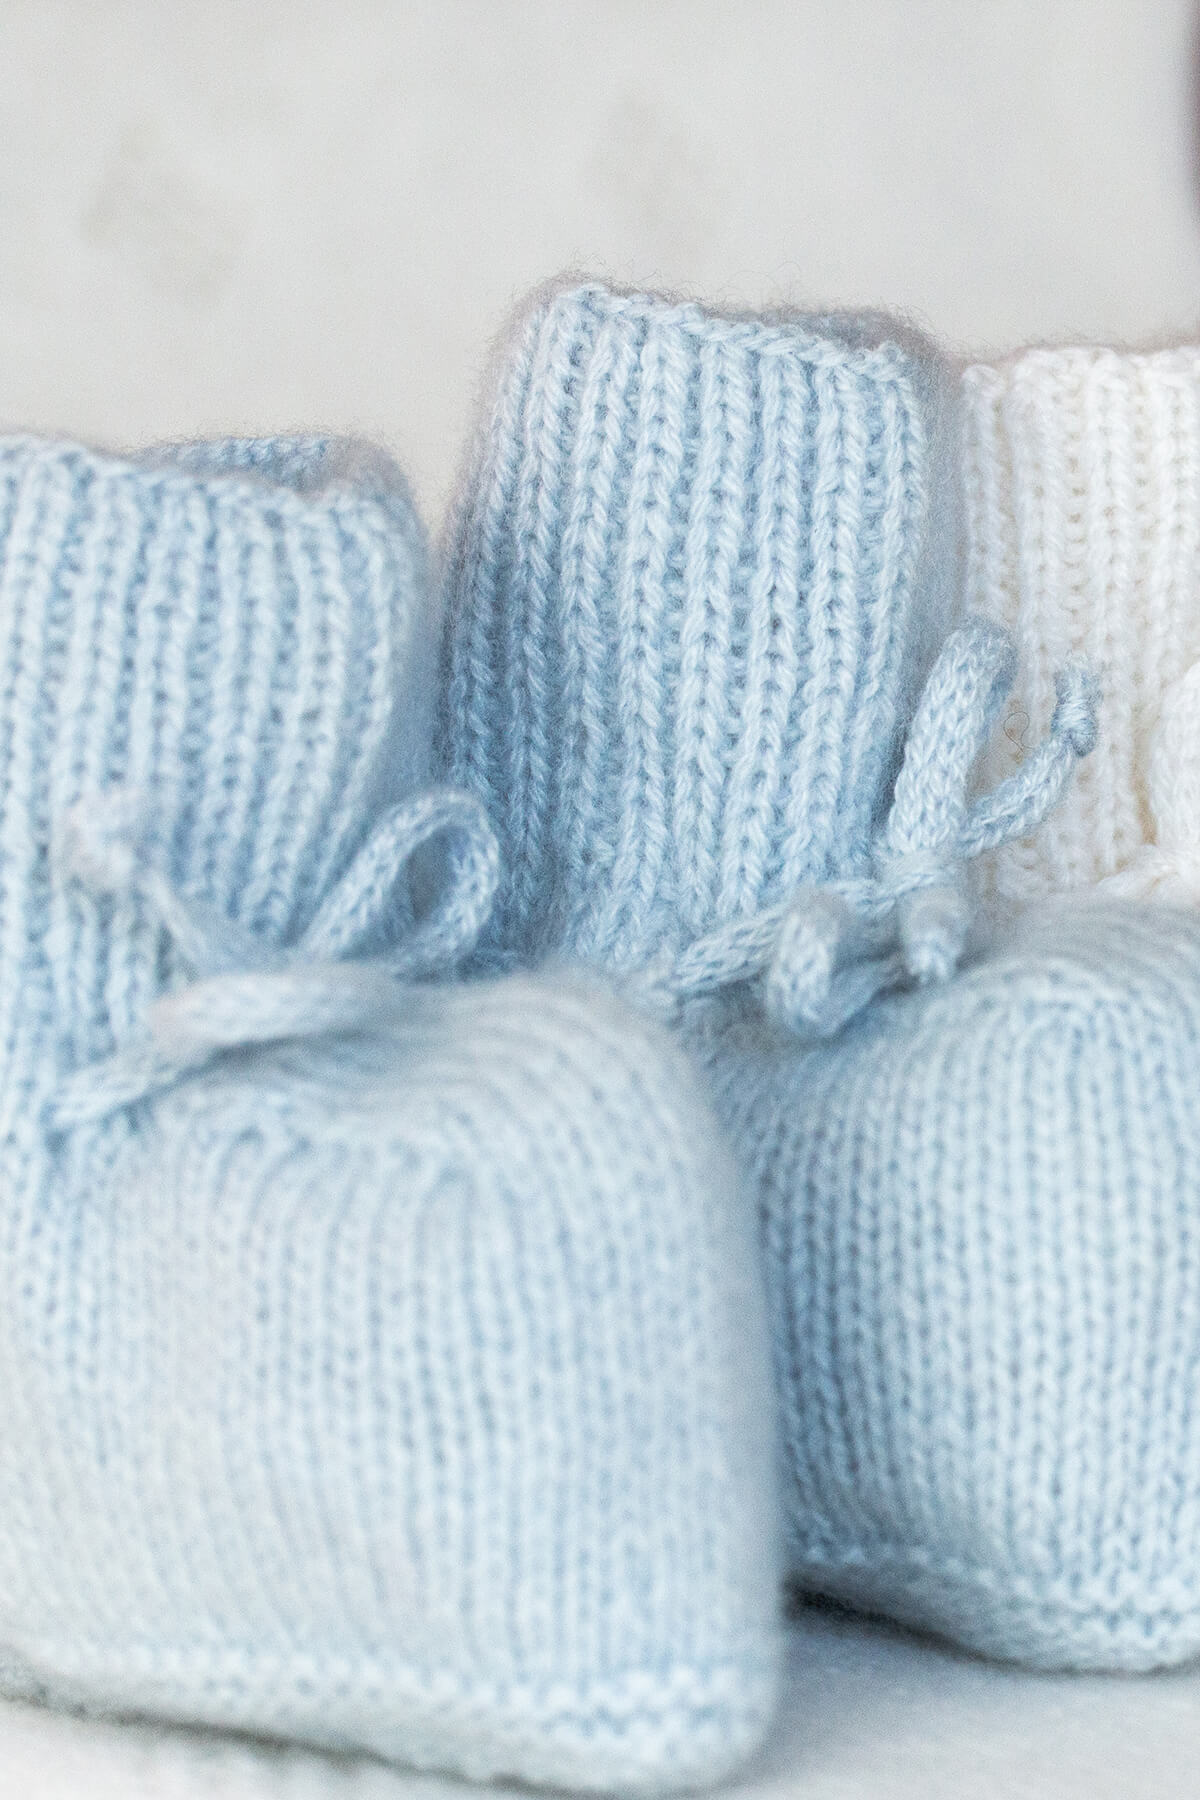 Johnstons of Elgin Hand Knitted Cashmere Baby Booties in Powder Blue on white 617112809ONE